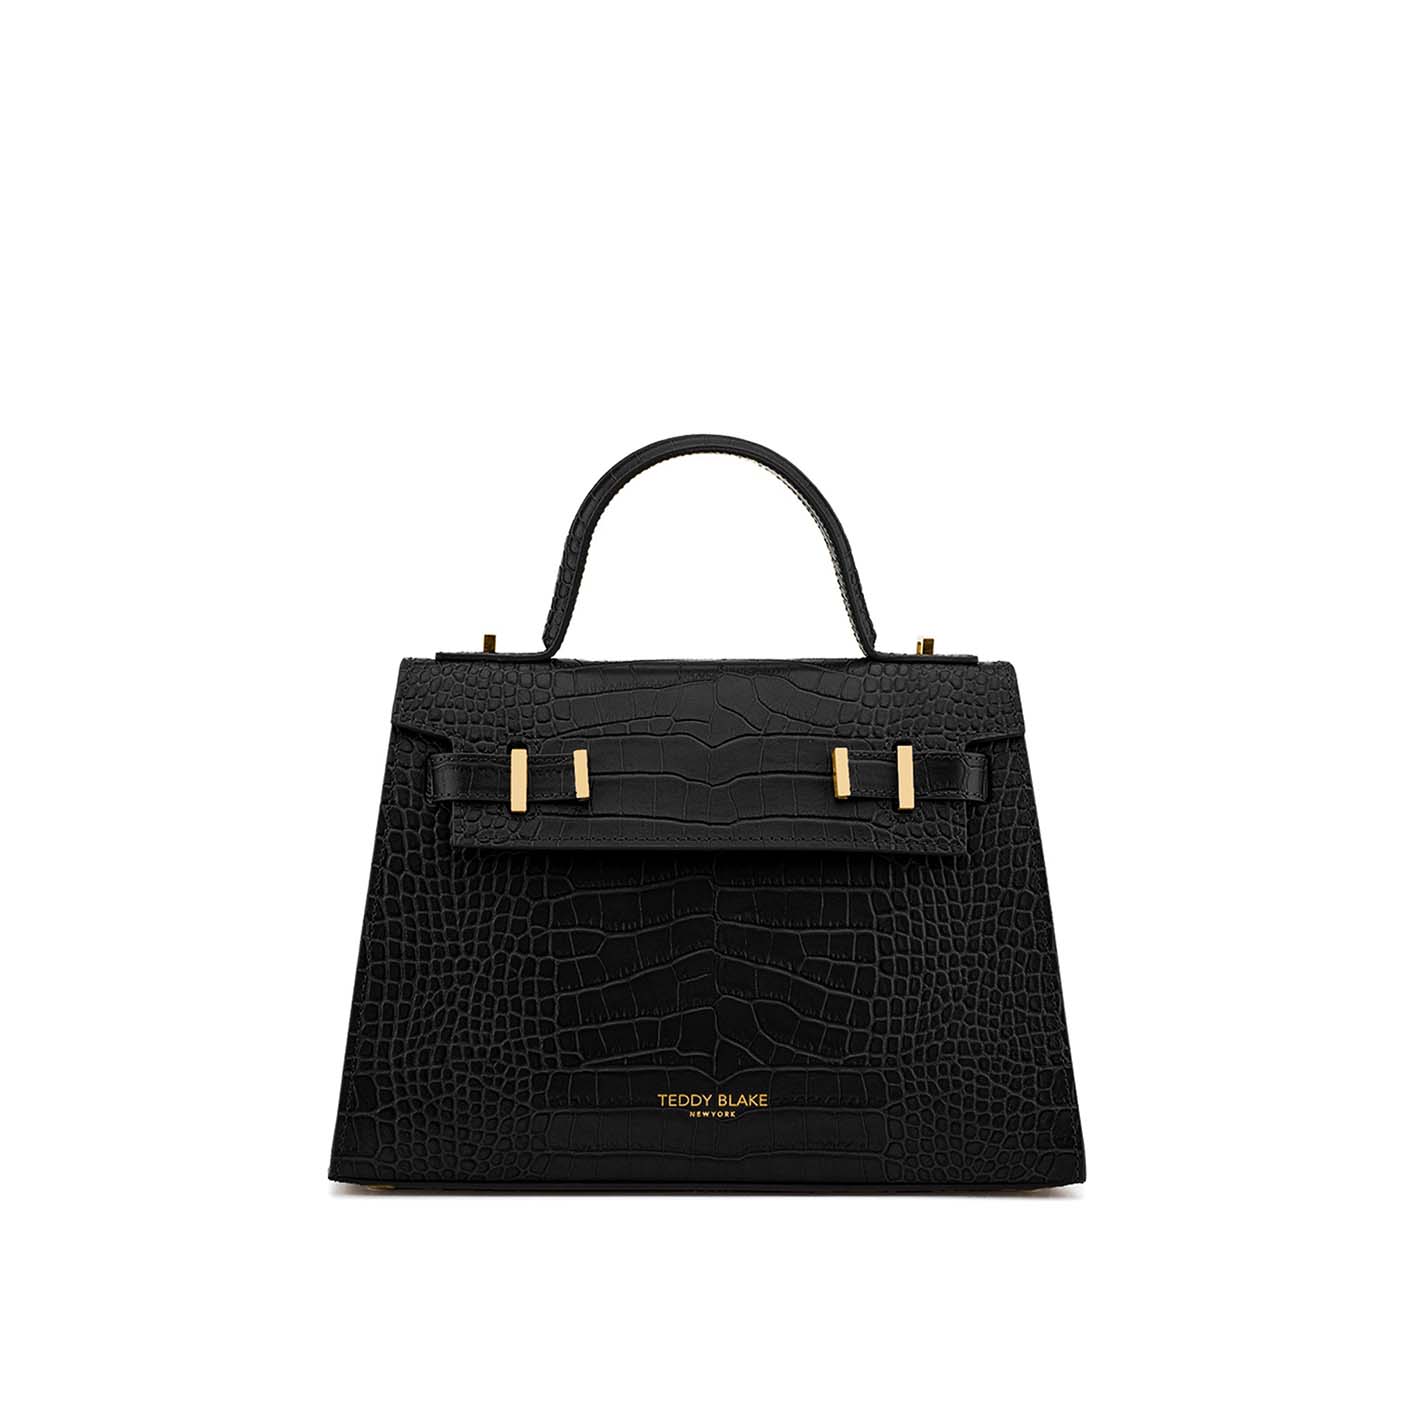 ava-croco-gold-11-black-leather-bag-front